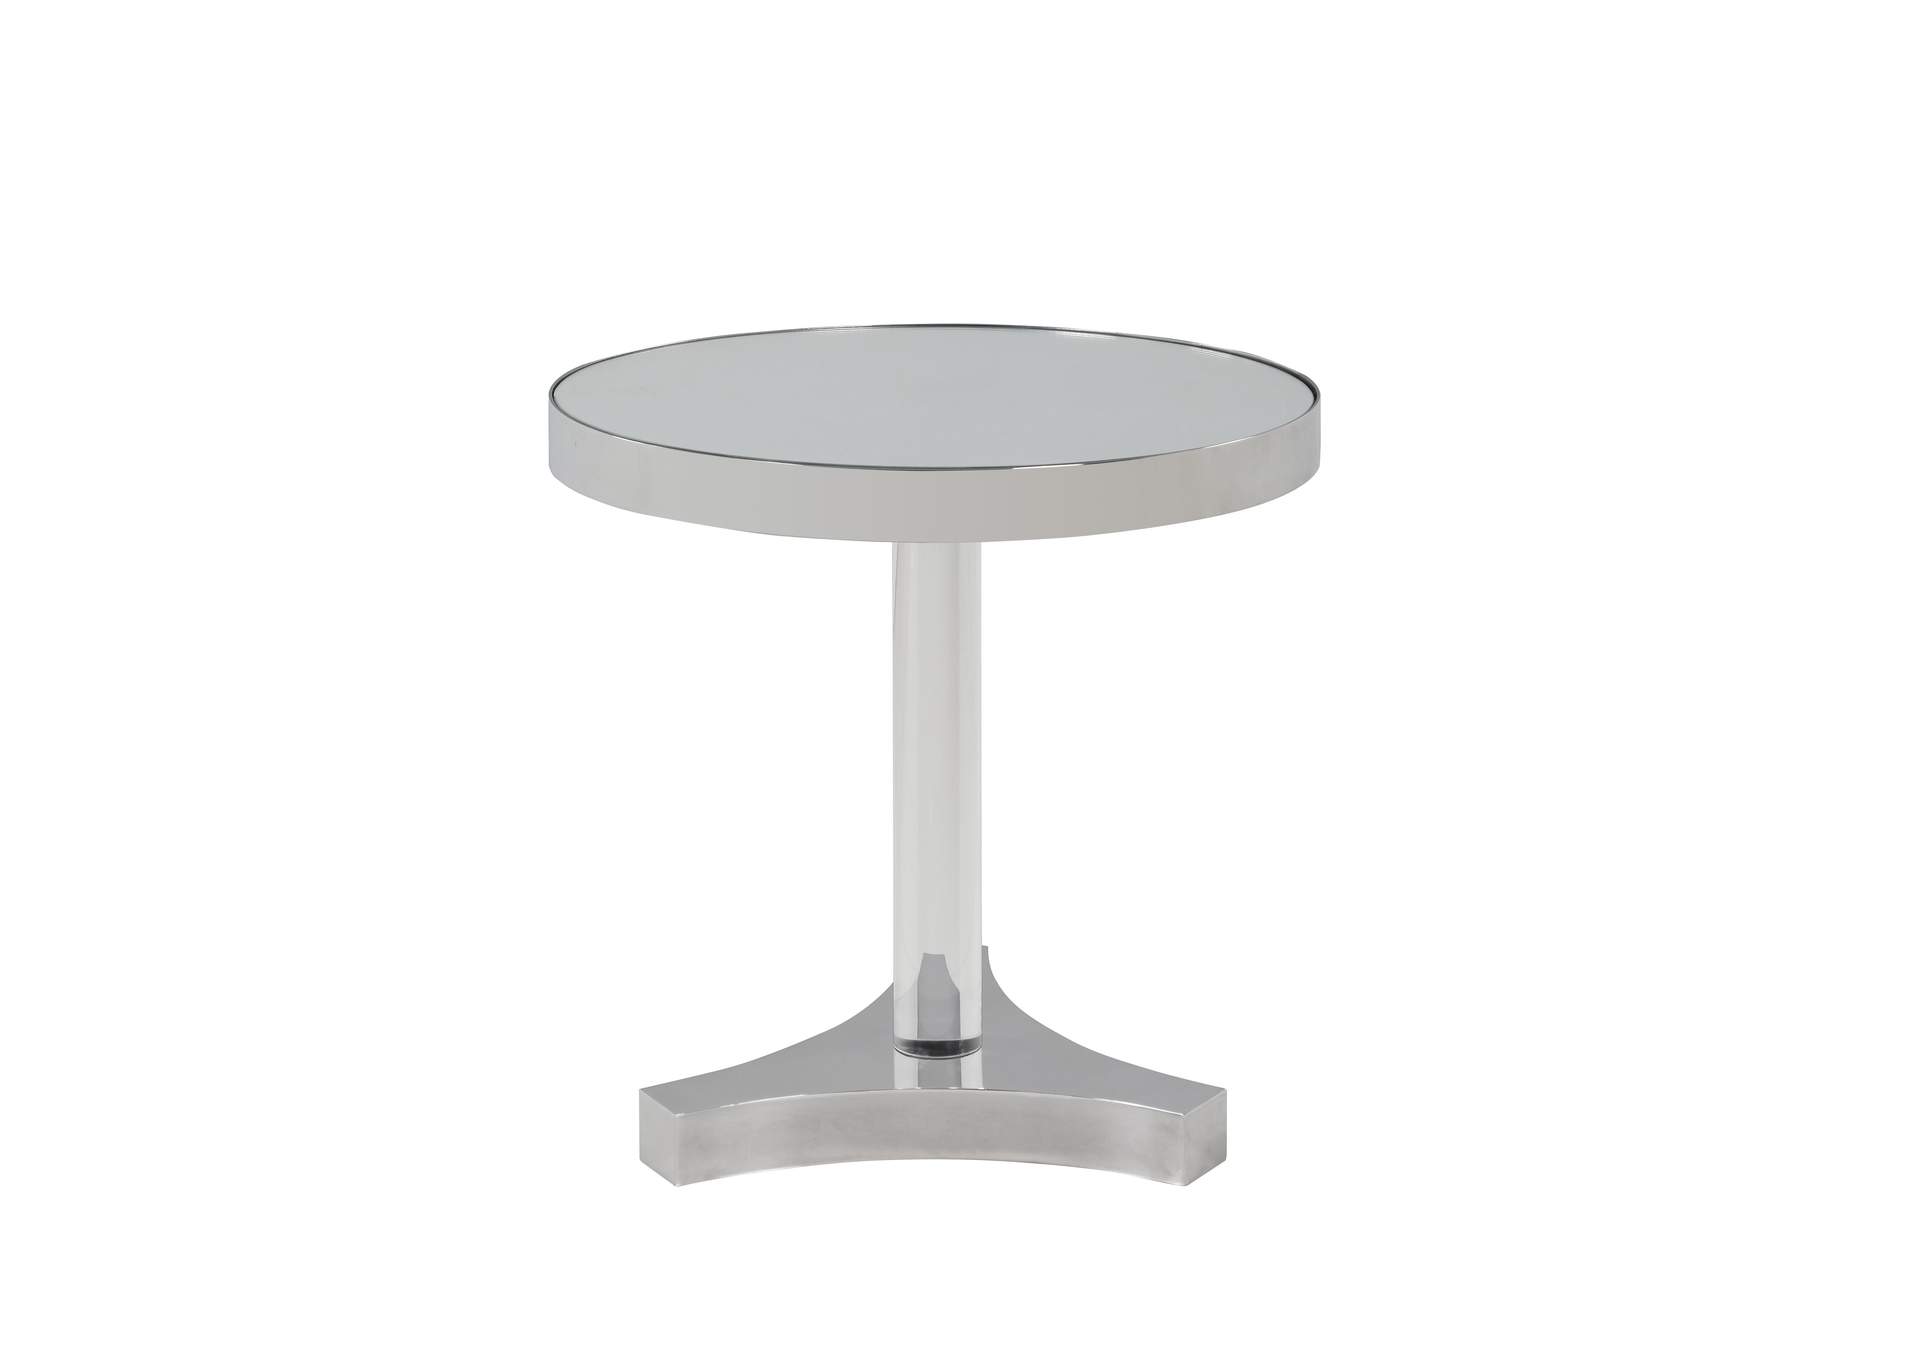 Polished SS Lamp Table w/ Mirror Accent,Chintaly Imports